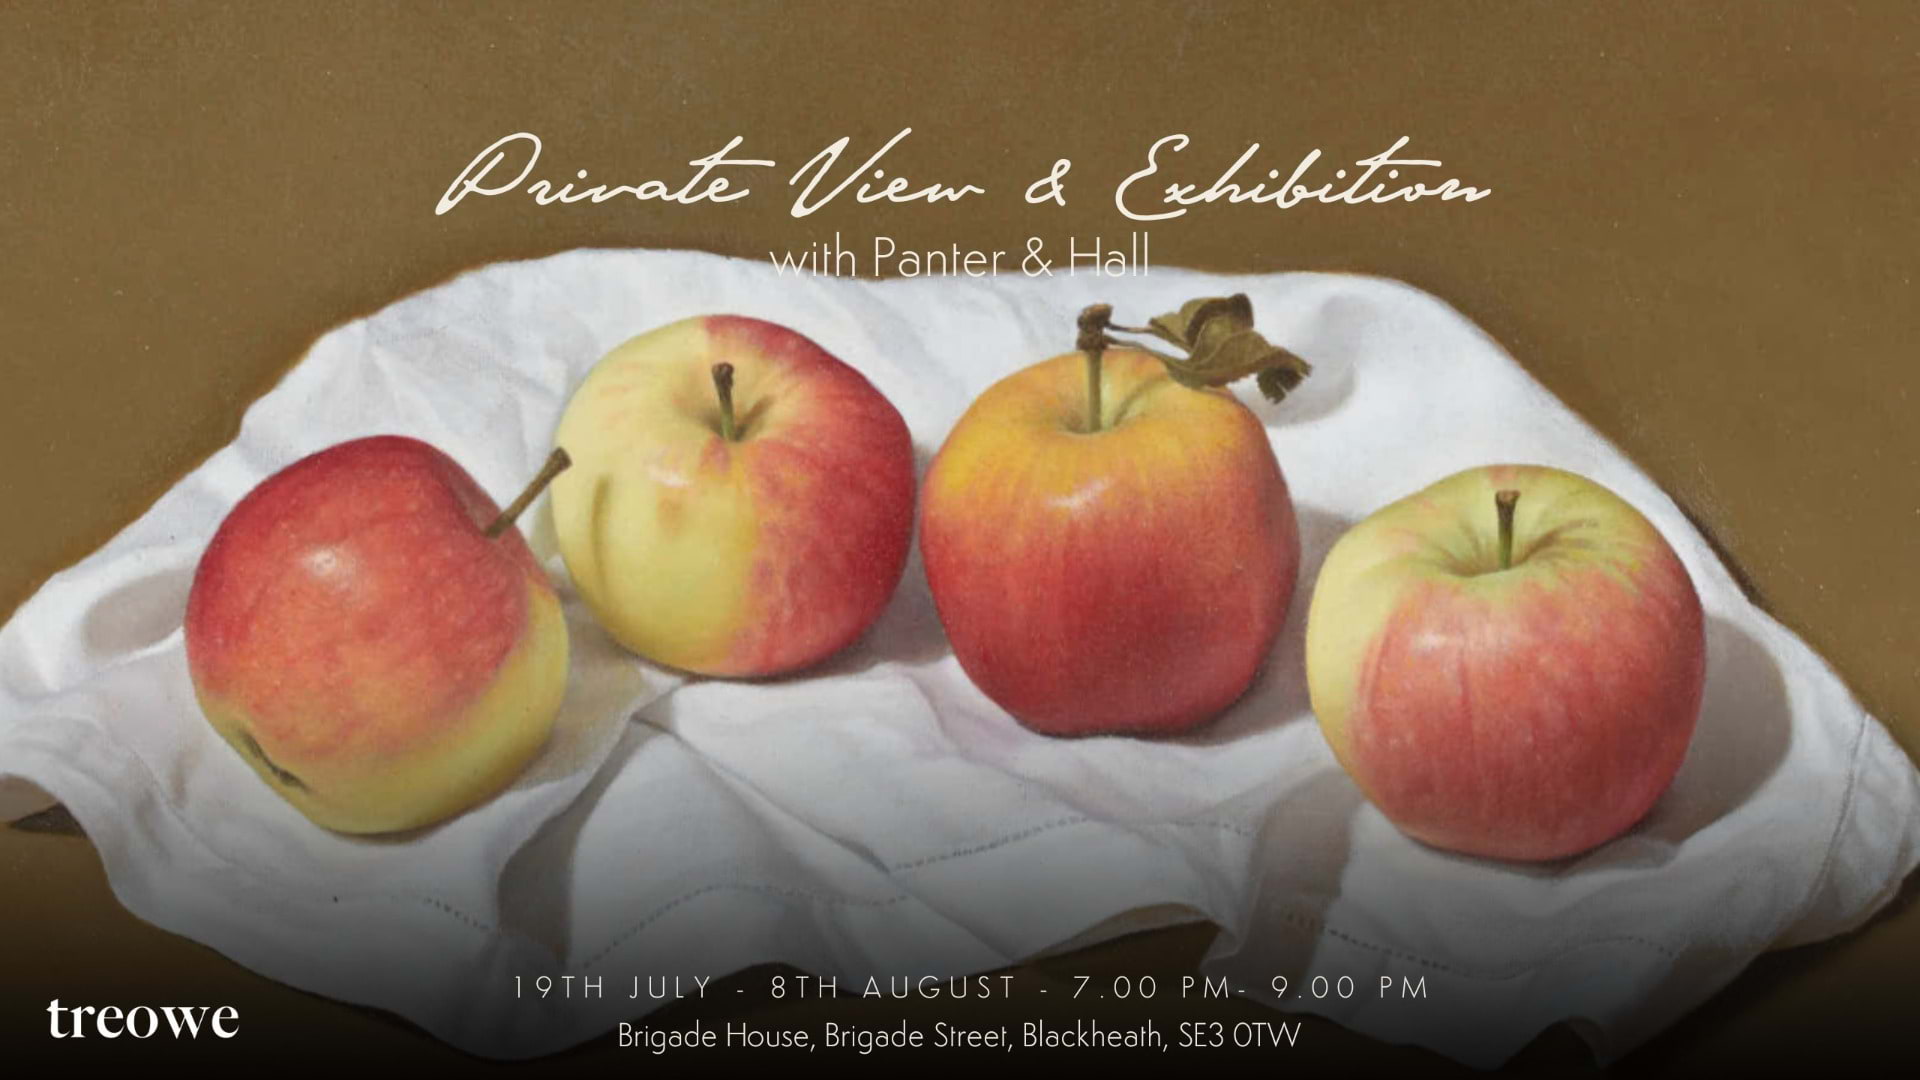 Book a private view of Treowe's exhibition with Panter & Hall